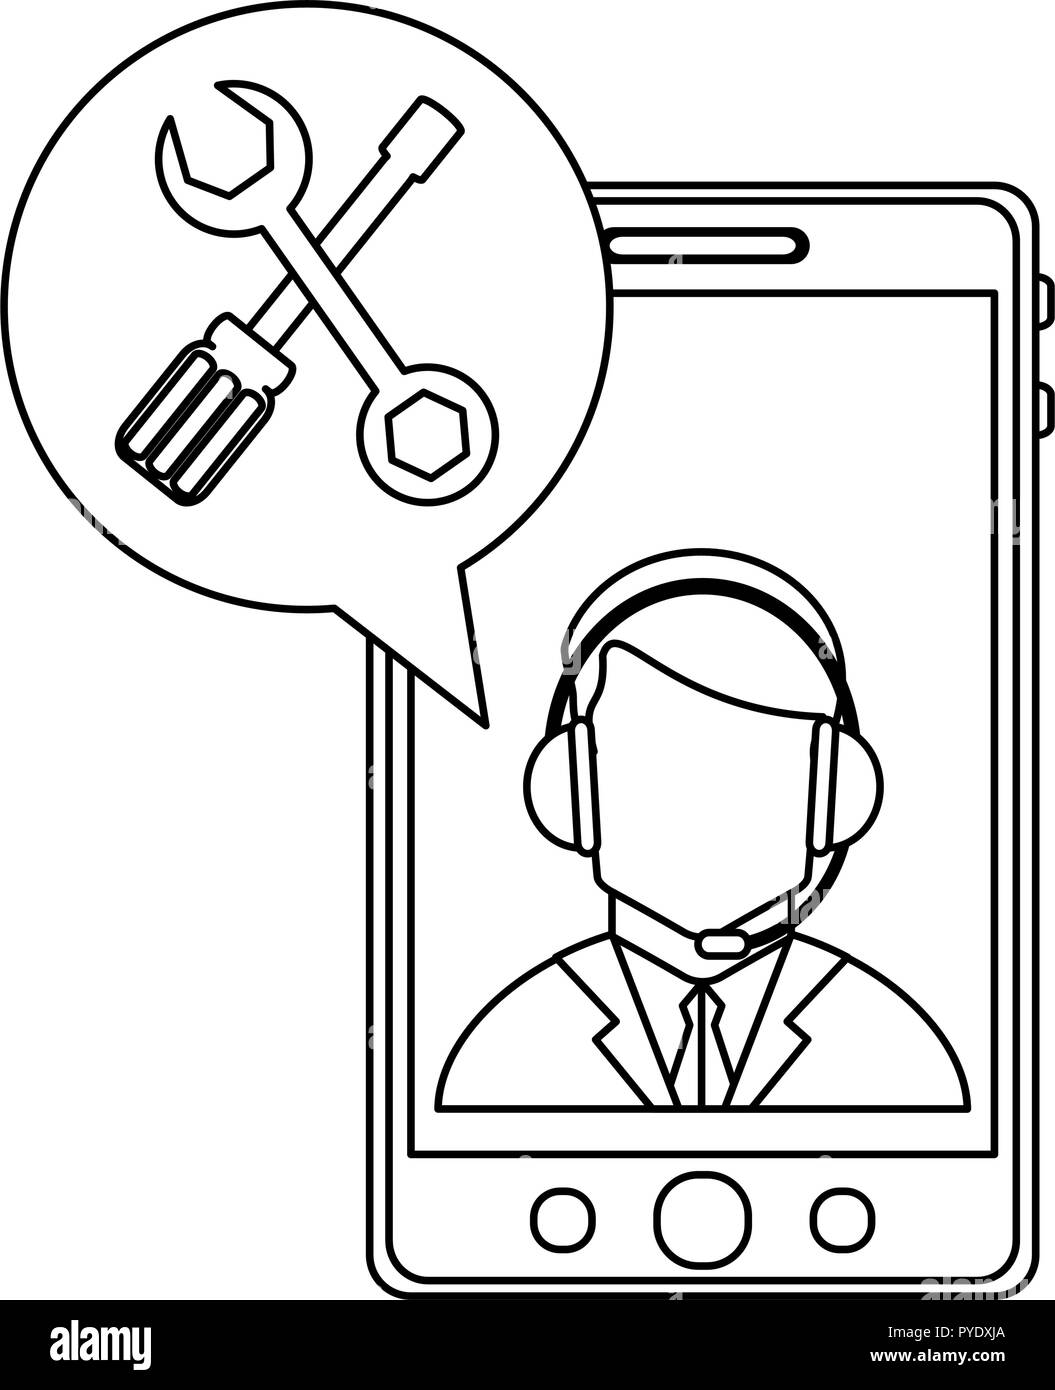 Smartphone technical support in black and white Stock Vector